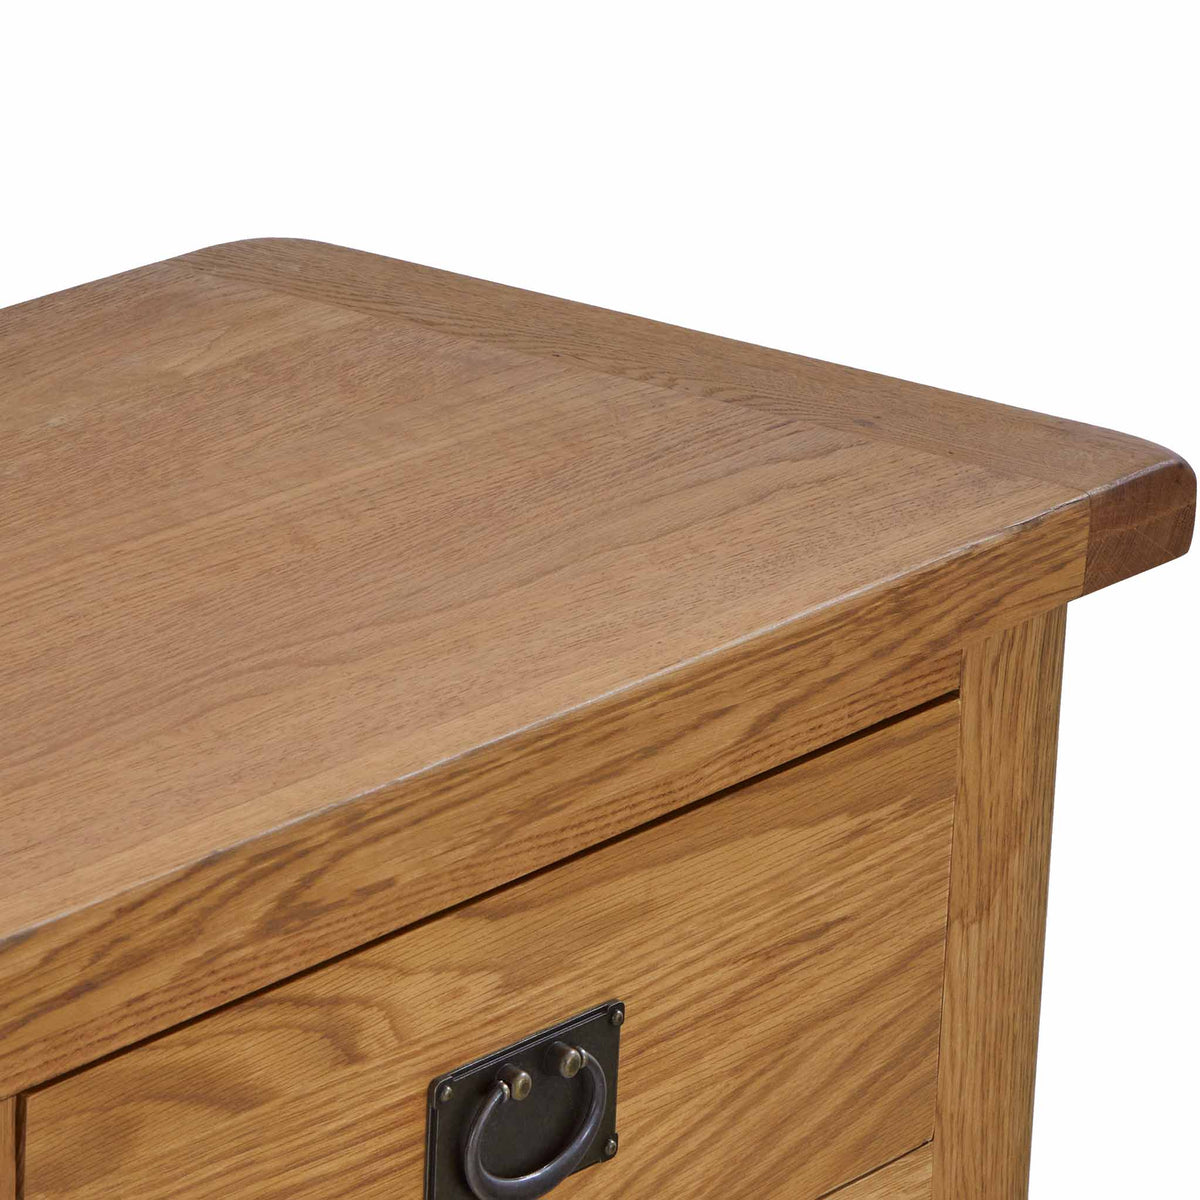 Zelah Oak Small Sideboard with Baskets - Top view